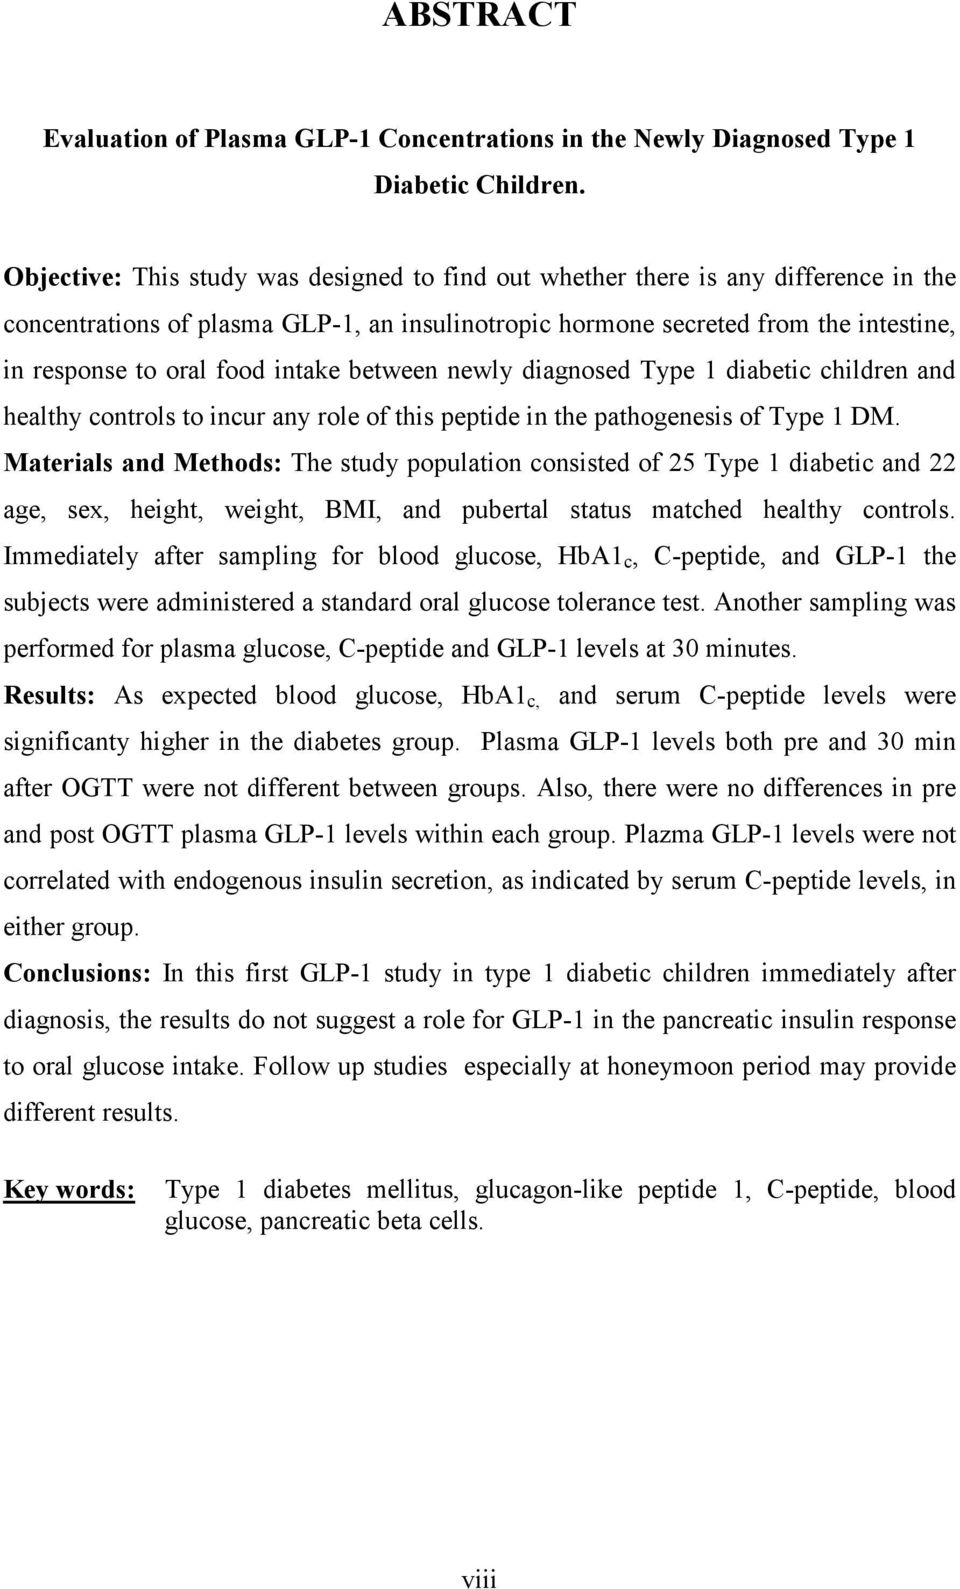 intake between newly diagnosed Type 1 diabetic children and healthy controls to incur any role of this peptide in the pathogenesis of Type 1 DM.